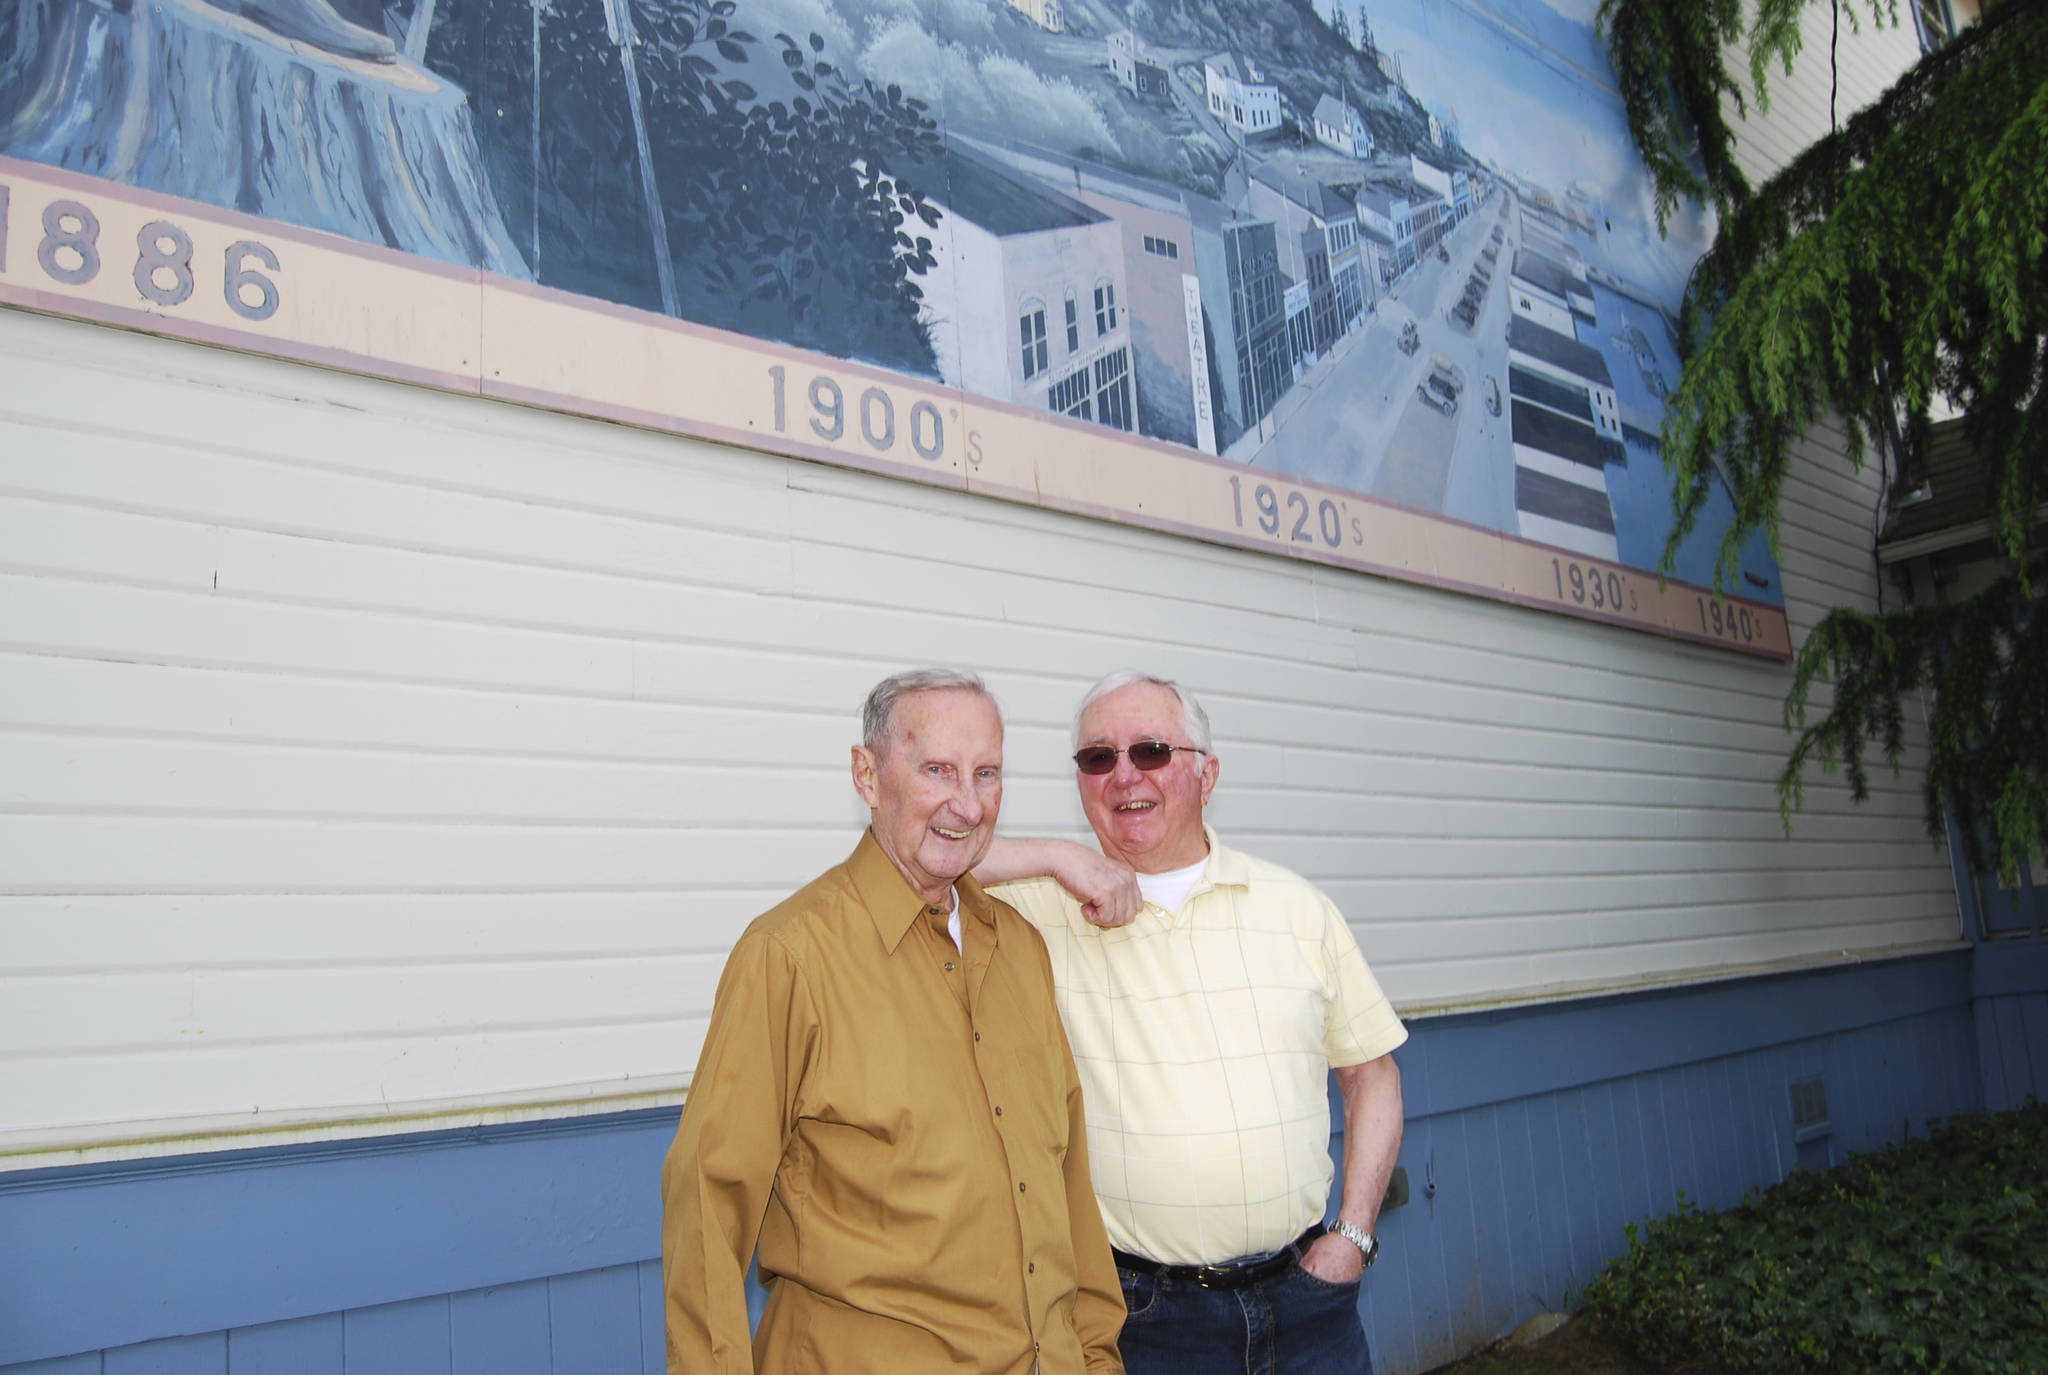 Bob Ulsh (left) and Roy Carr stand in front of a 12-panel mural outside the Sidney Art Gallery and Museum that Ulsh painted depicting a timeline of Port Orchard’s history beginning in the 1880s. (Bob Smith | Kitsap Daily News photo 2016)